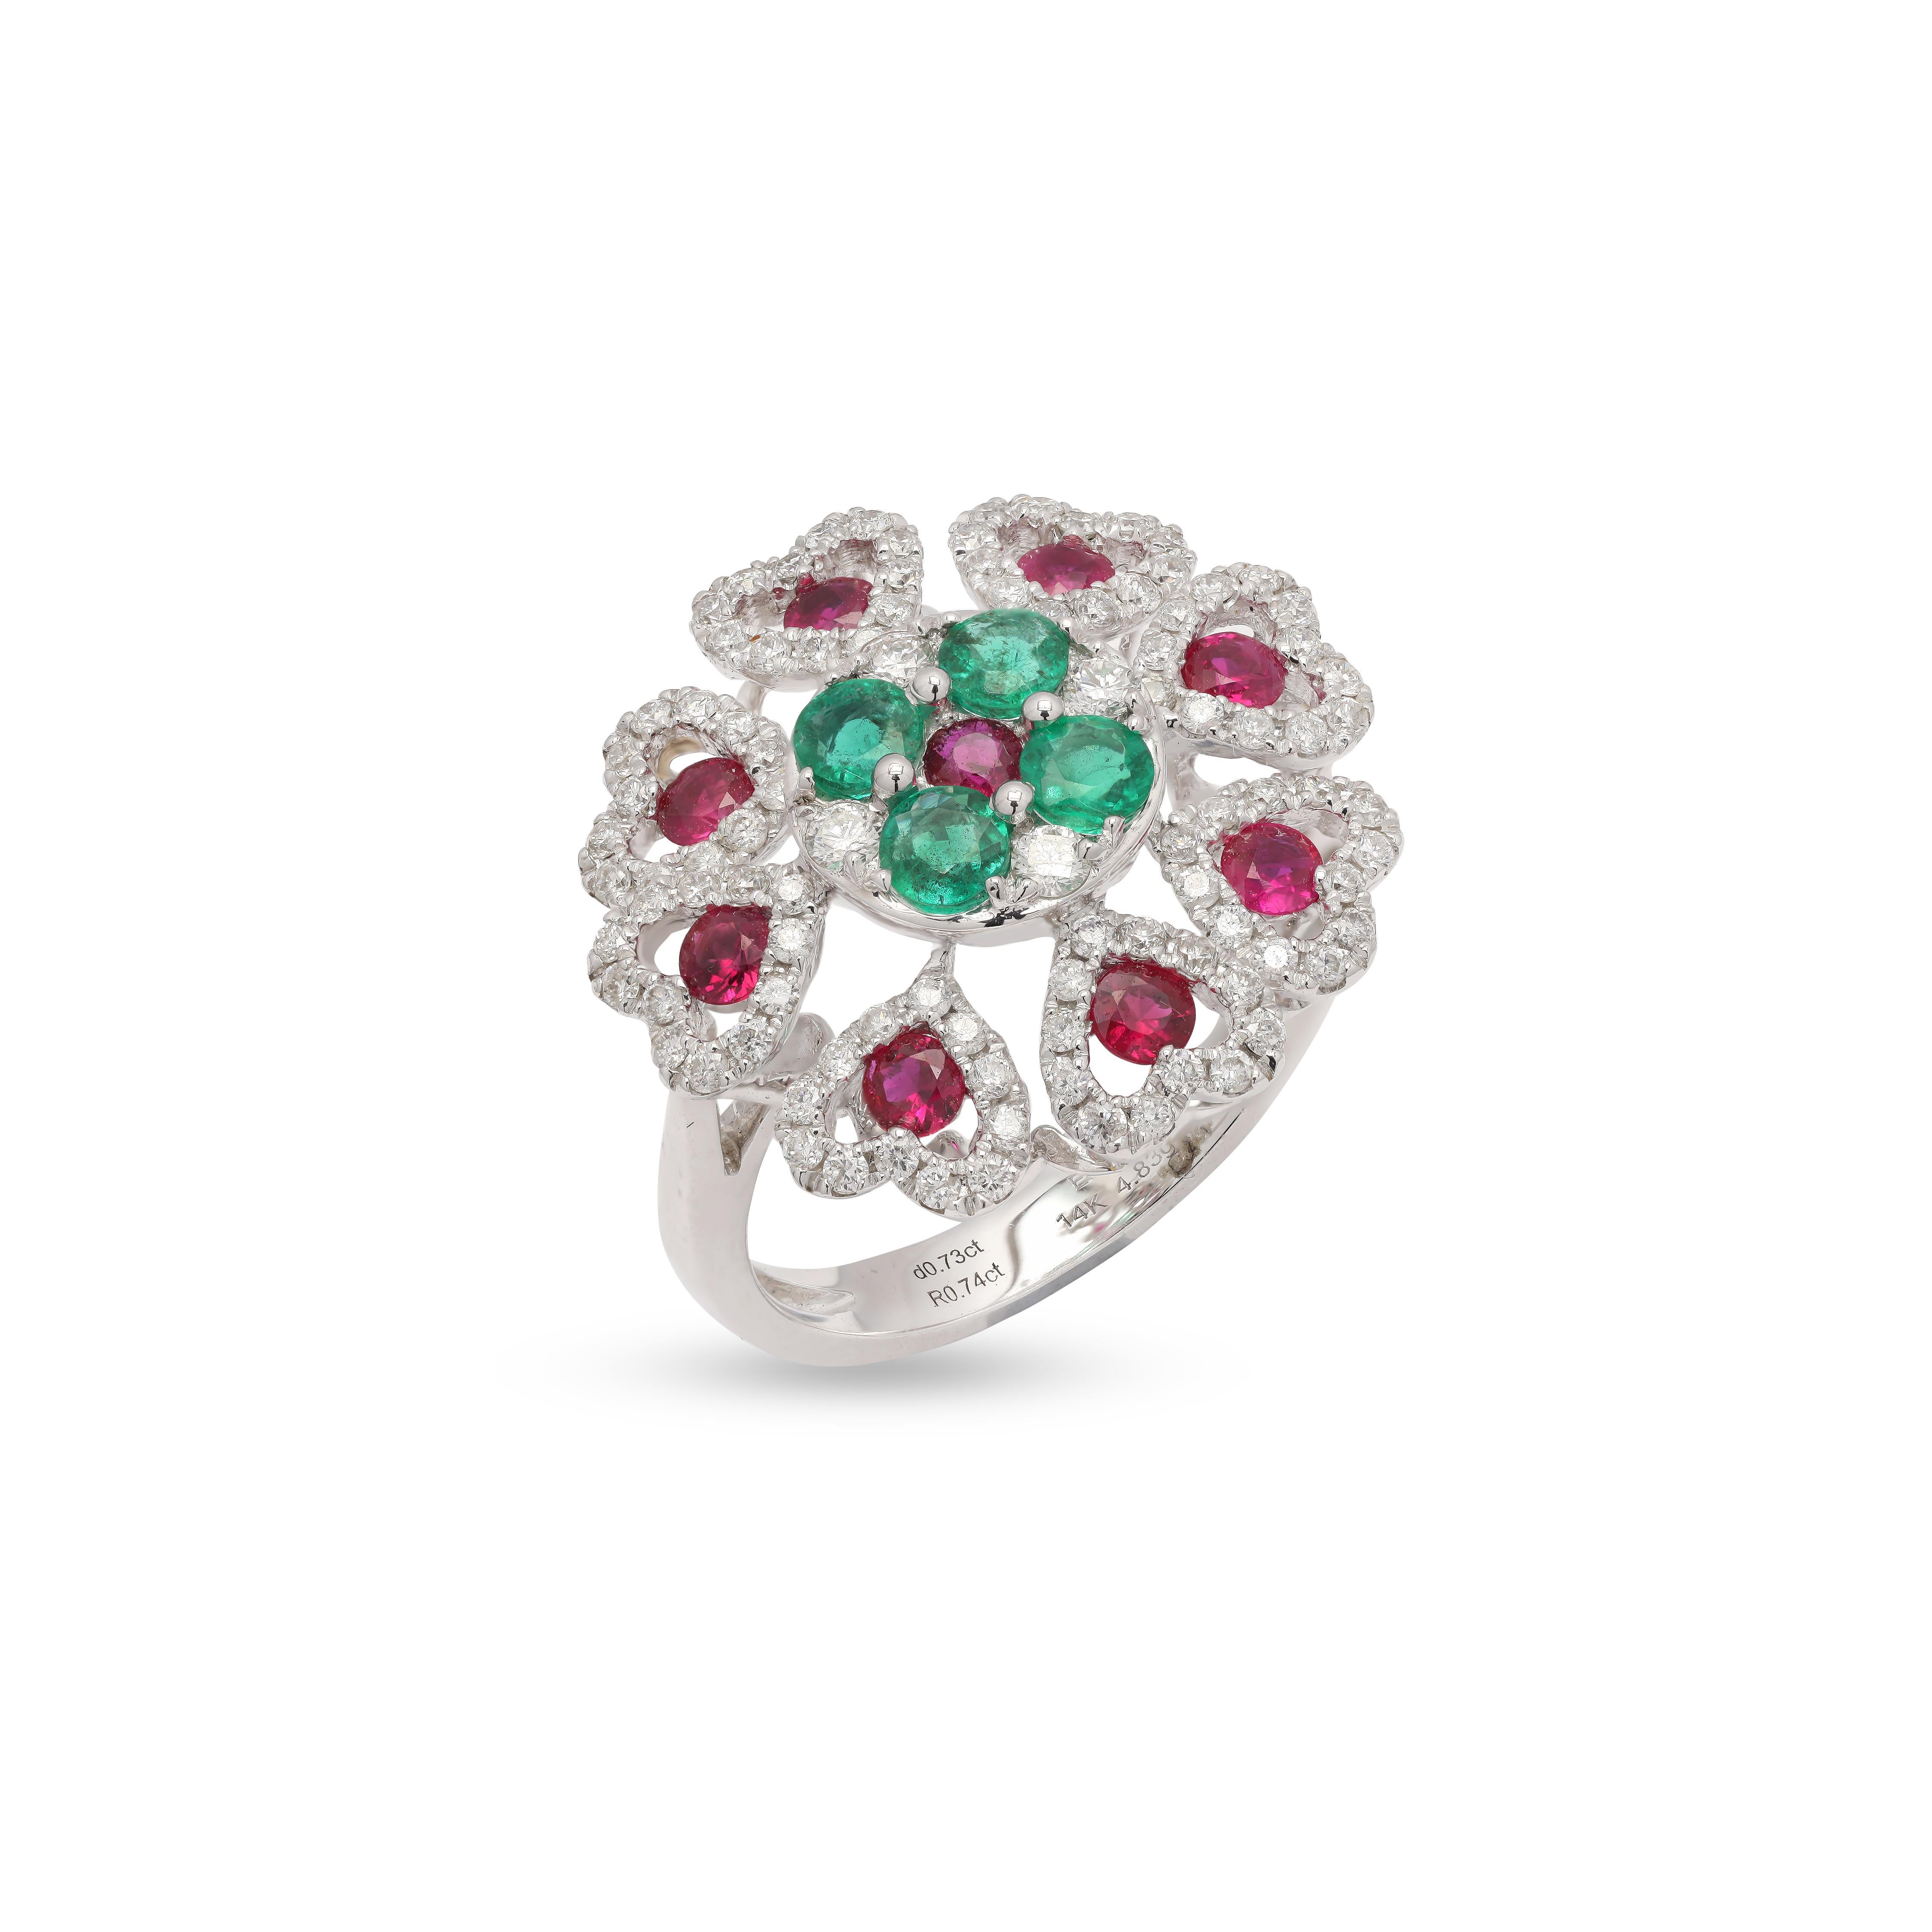 For Sale:  14K White Gold Emerald and Ruby Floral Cocktail Ring with Diamonds 3